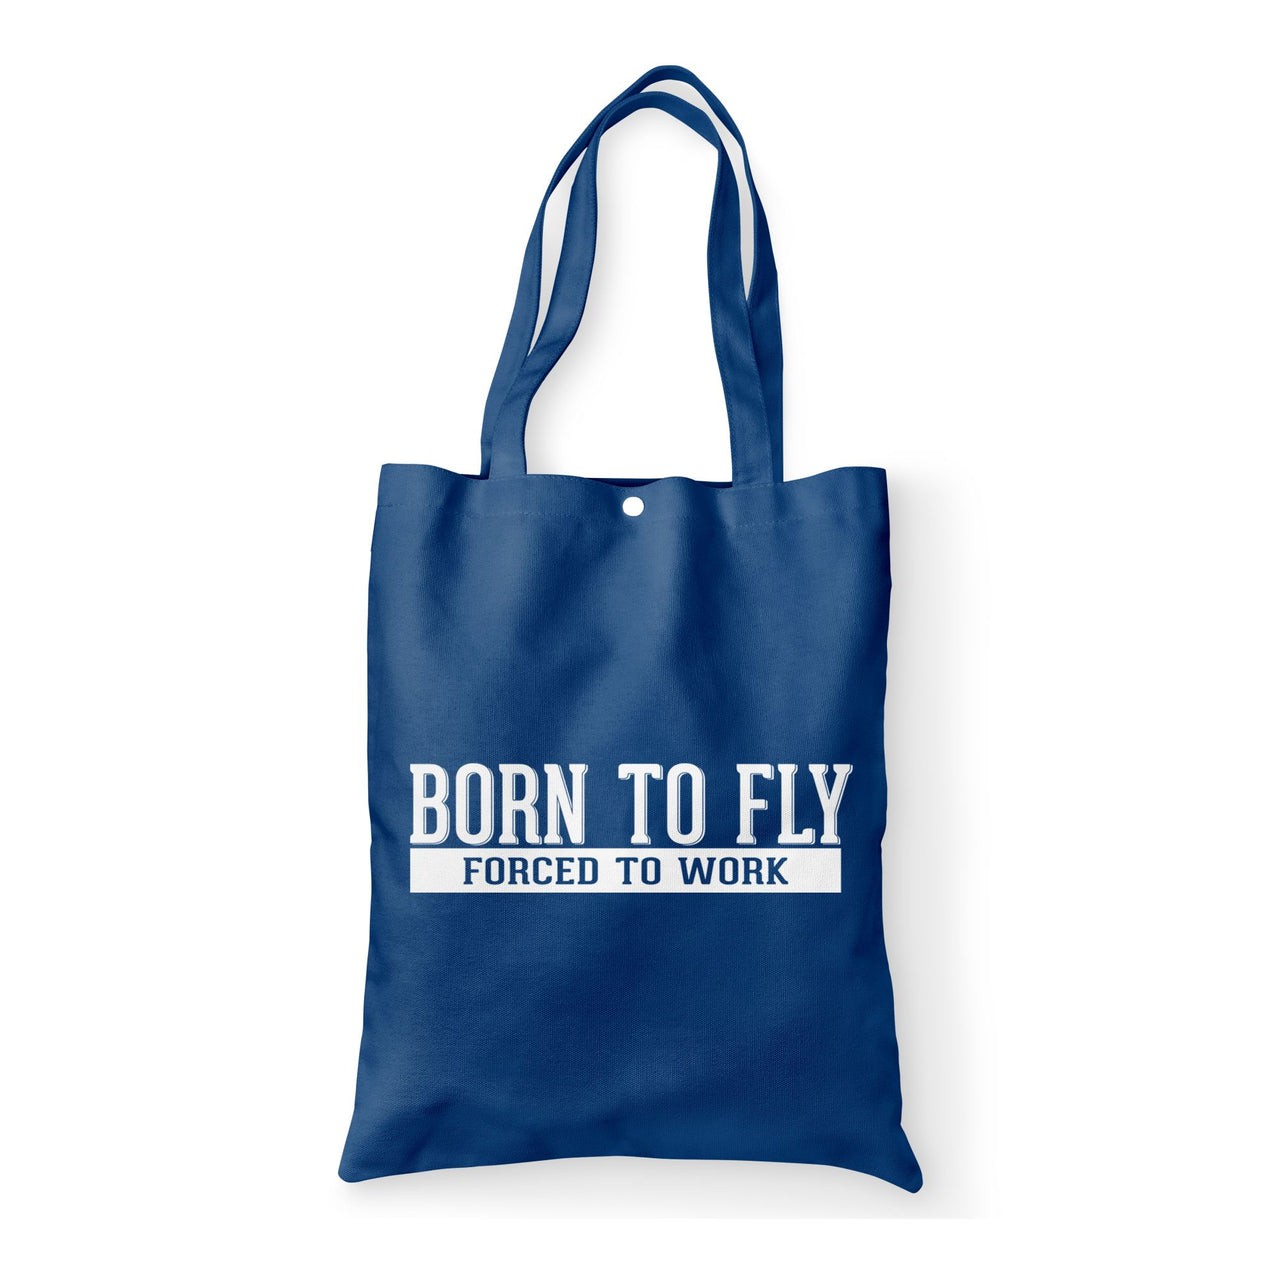 Born To Fly Forced To Work Designed Tote Bags